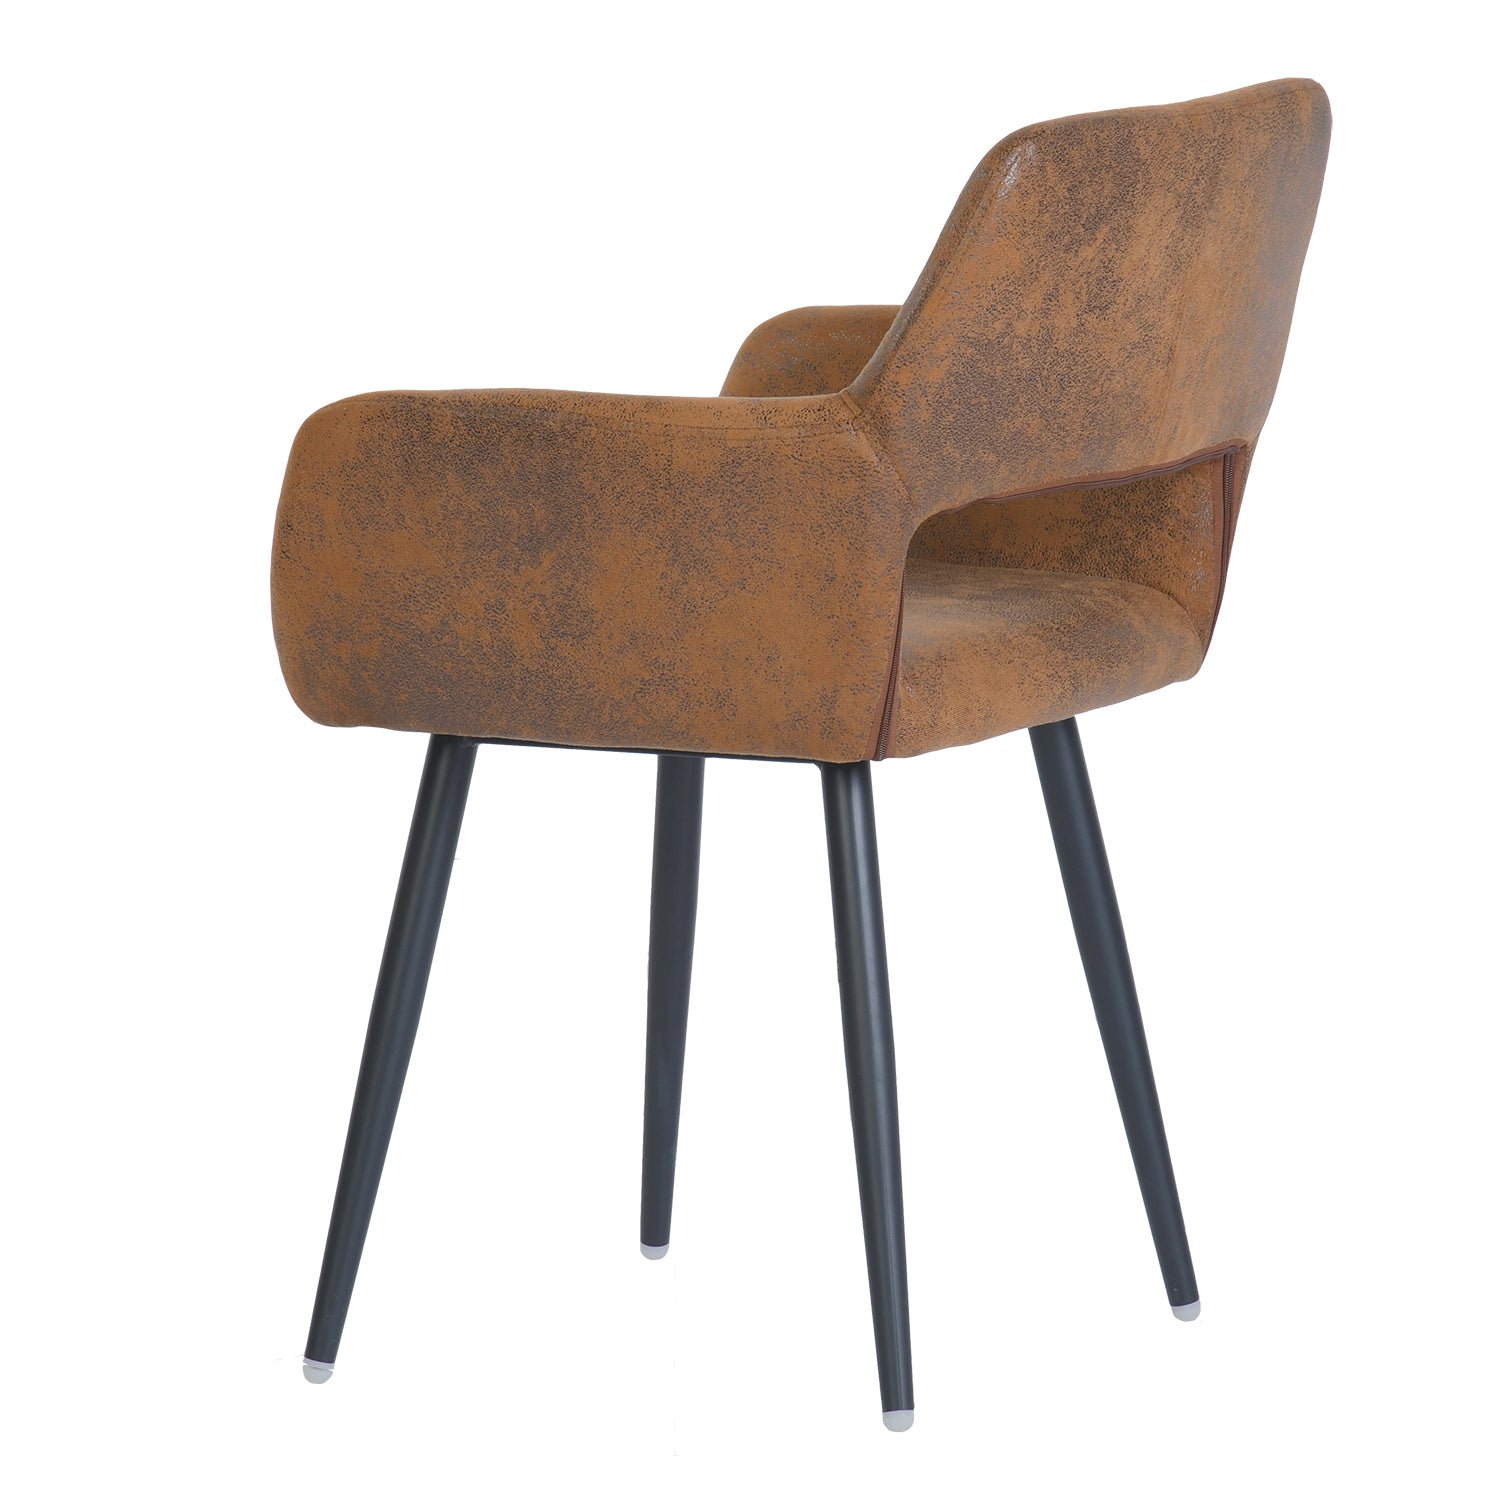 Cromwell Brown Dining Chair